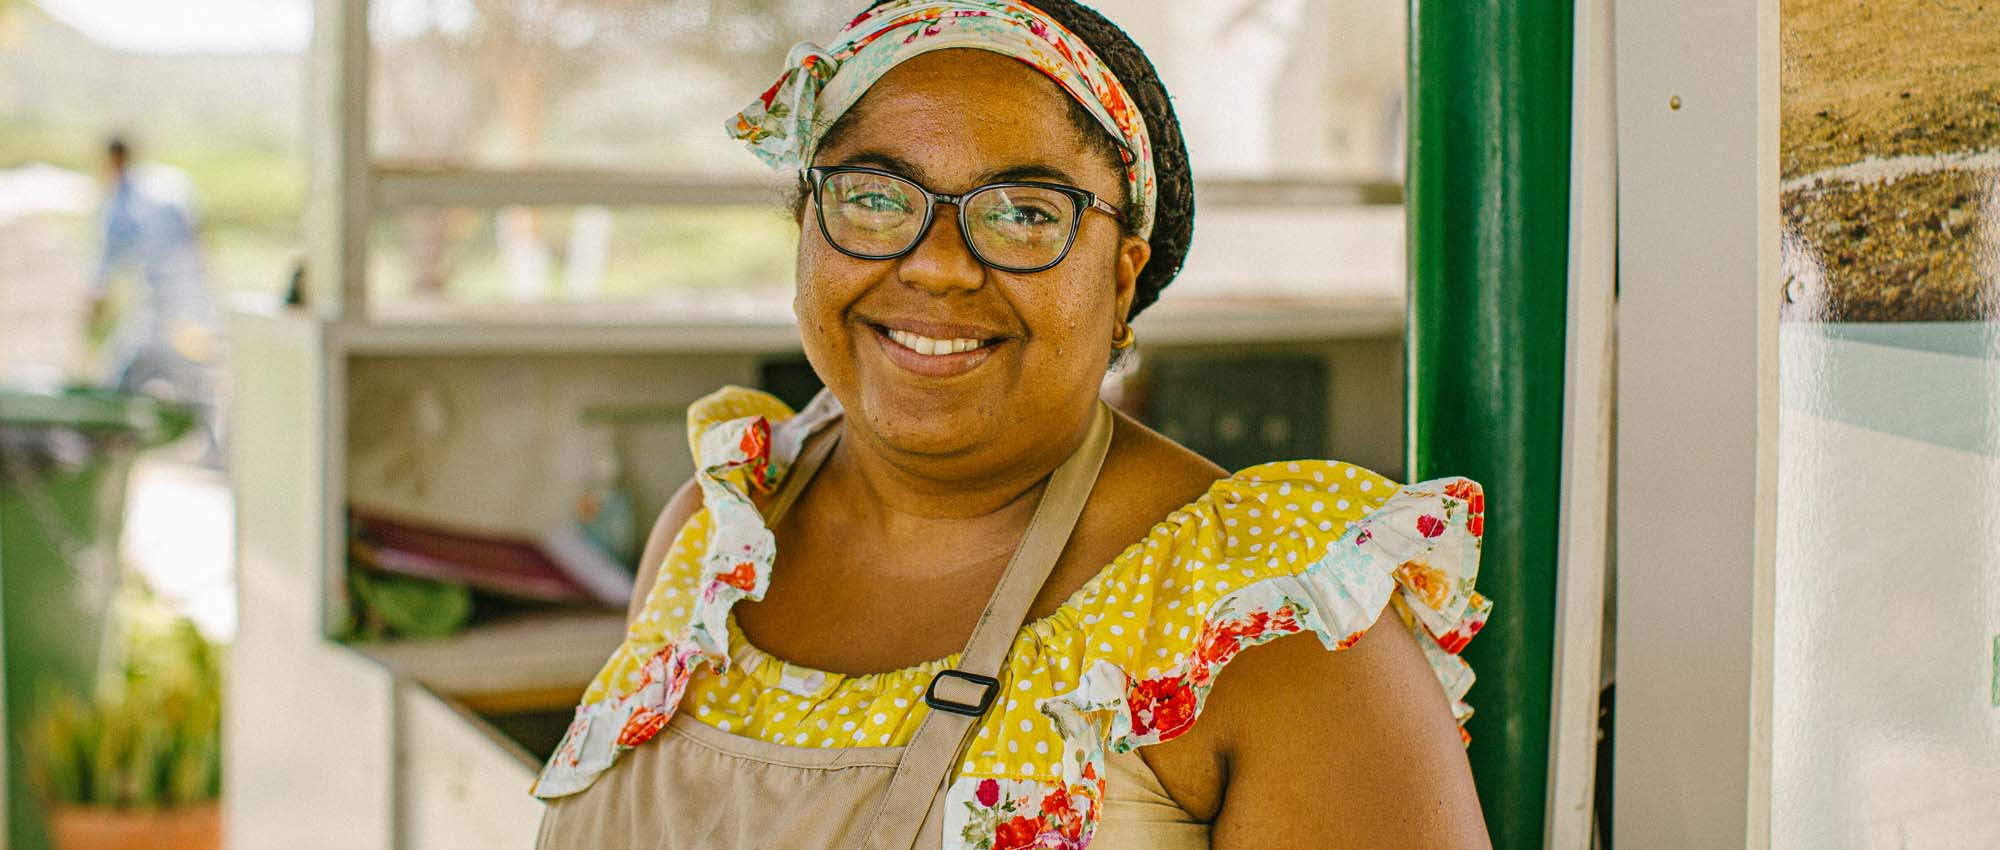 Woman in apron smiling at camera